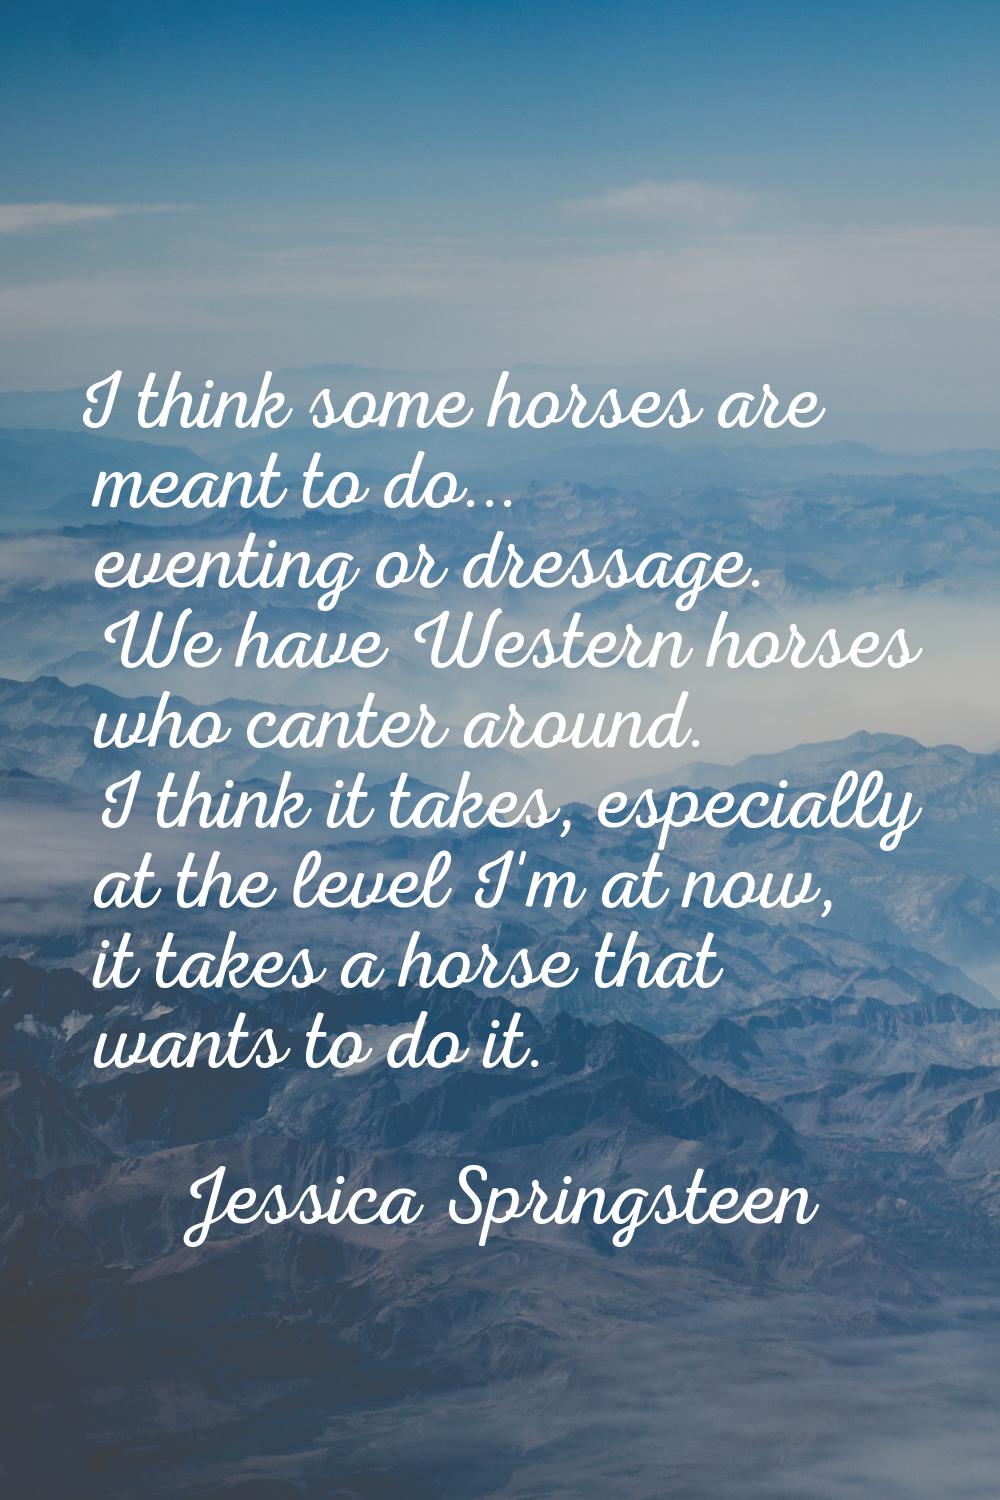 I think some horses are meant to do... eventing or dressage. We have Western horses who canter arou